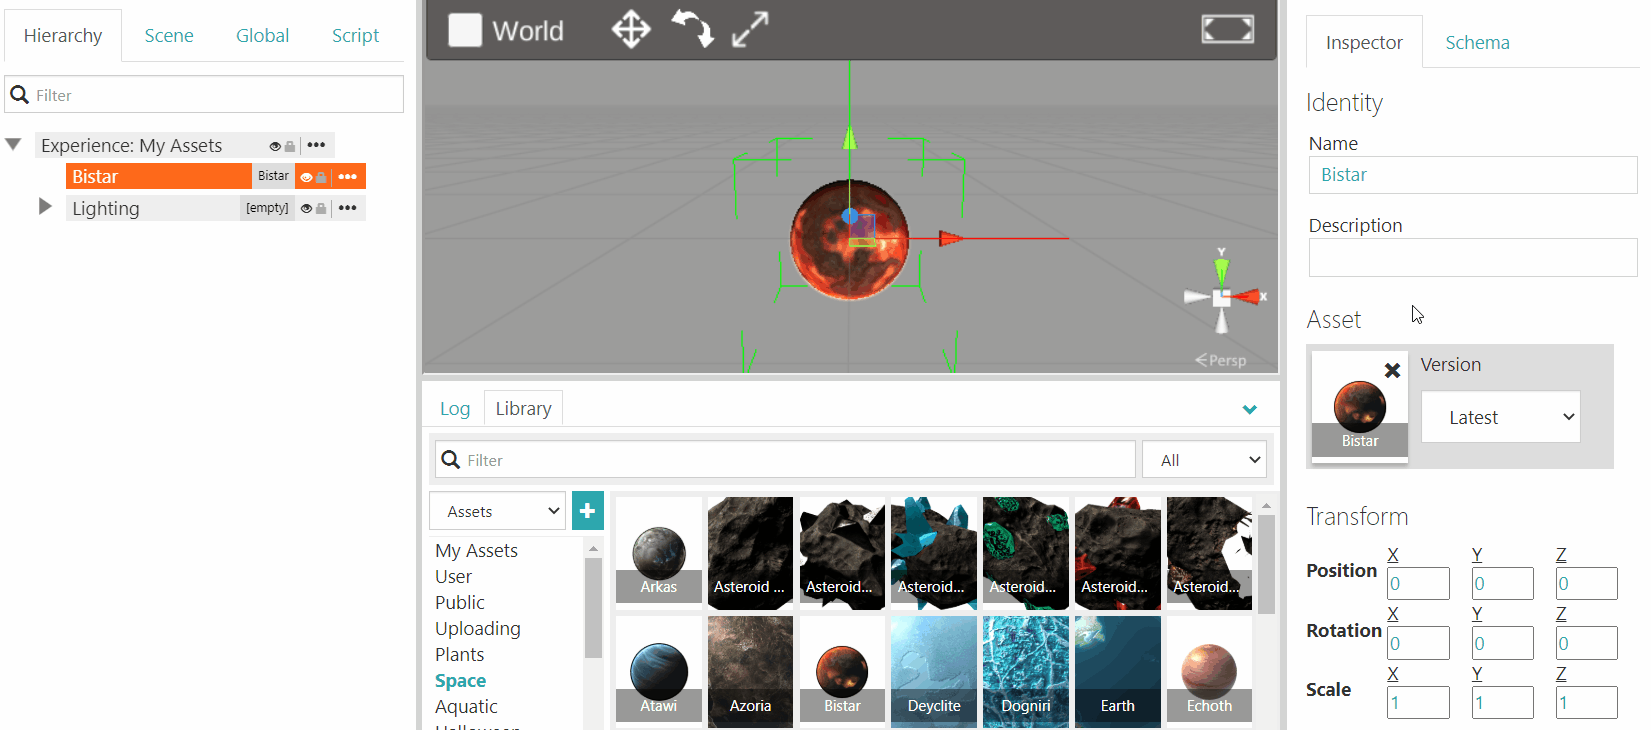 Click X on planet thumbnail.  Planet disappears from canvas.